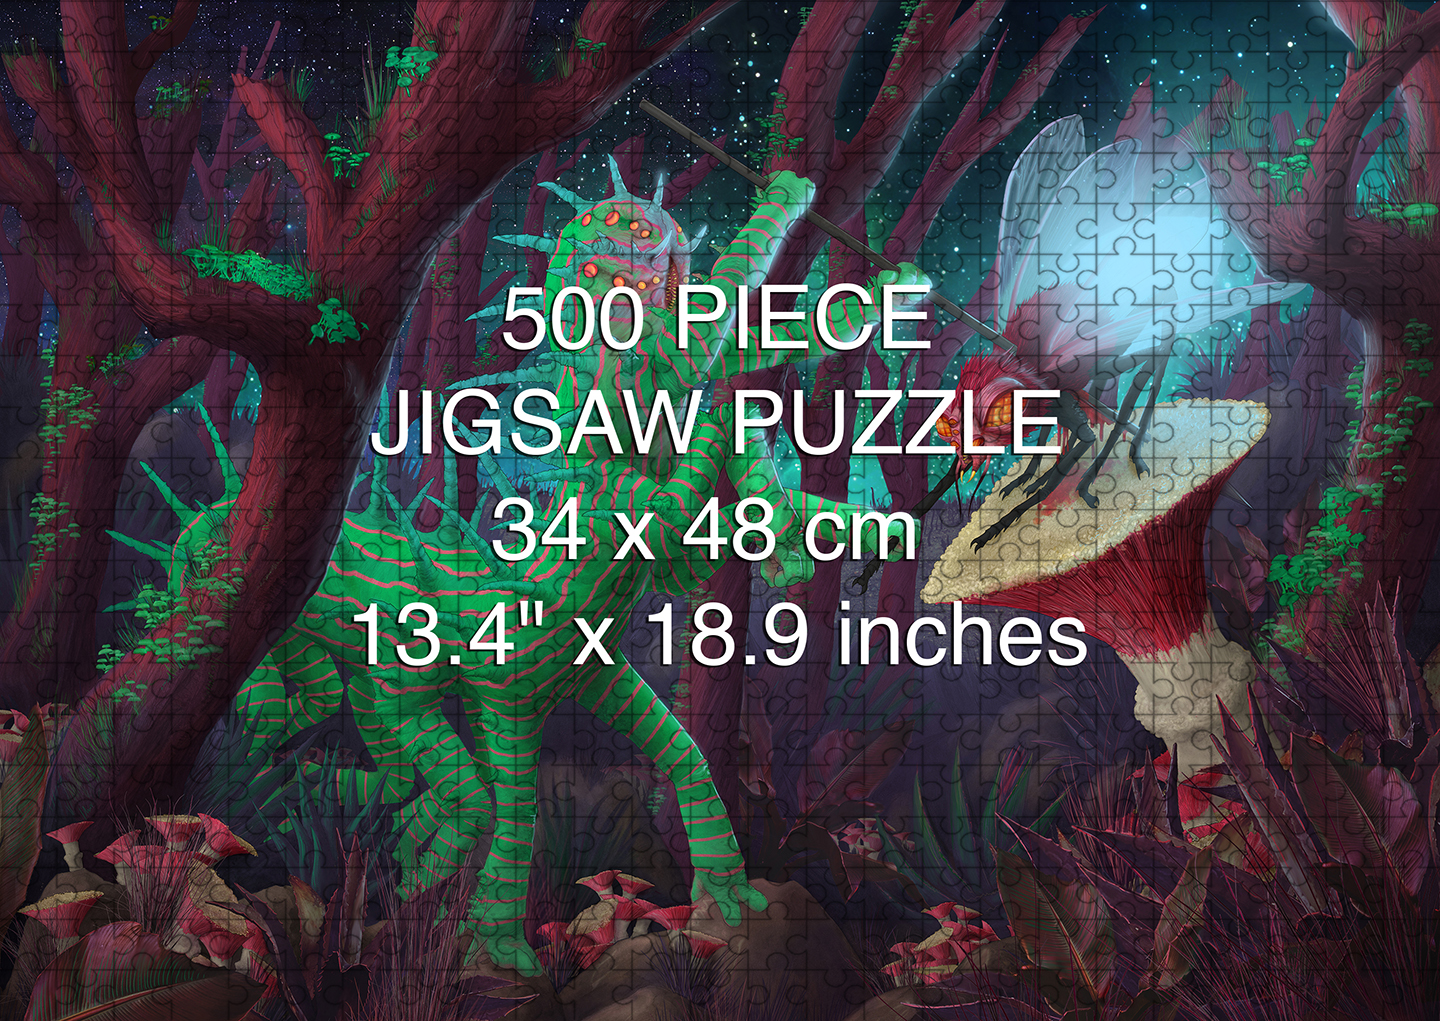 A Deilicate Balance. The KRex Brucus Hunts the Koba Fliege 500 piece puzzle by Aaron Wolf and Pandemic Puzzlesingdom